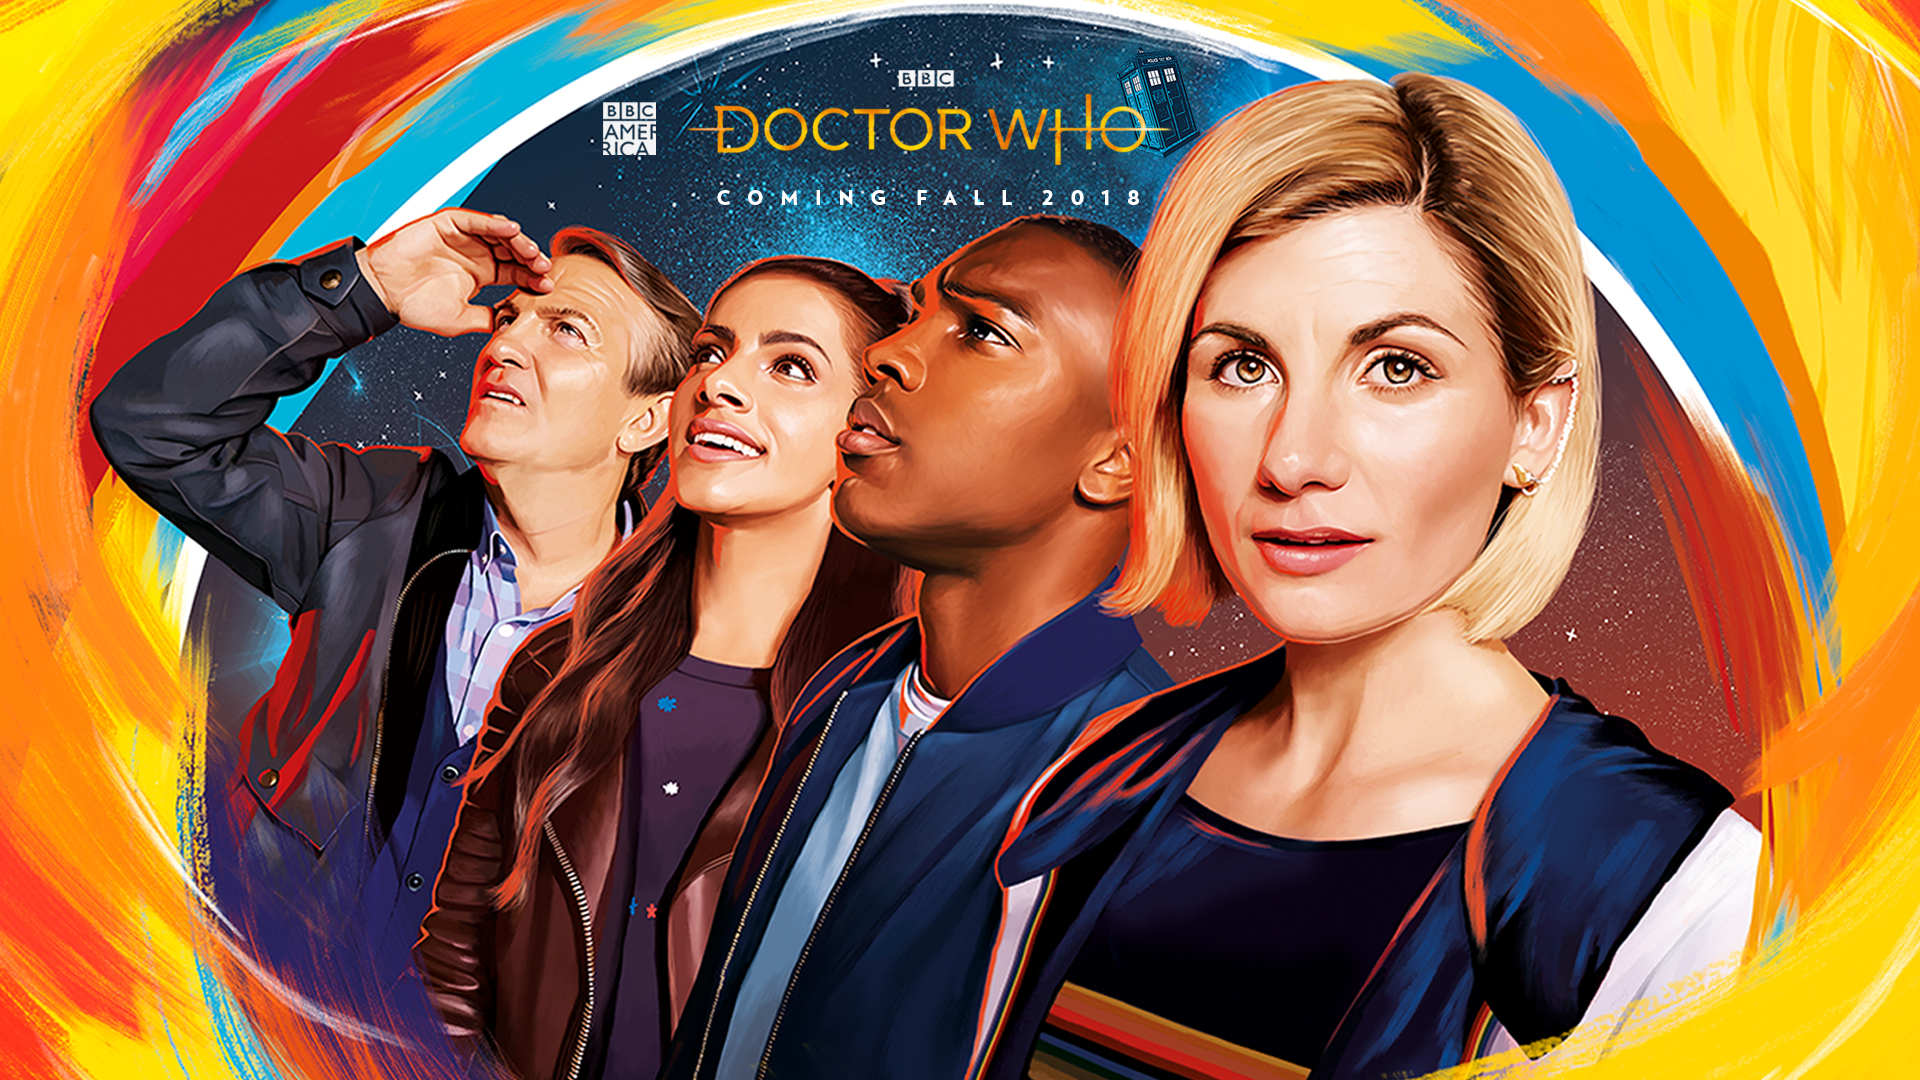 Bbc America Doctor Who Wallpaper - 13th Doctor And Companions - 1920x1080  Wallpaper 